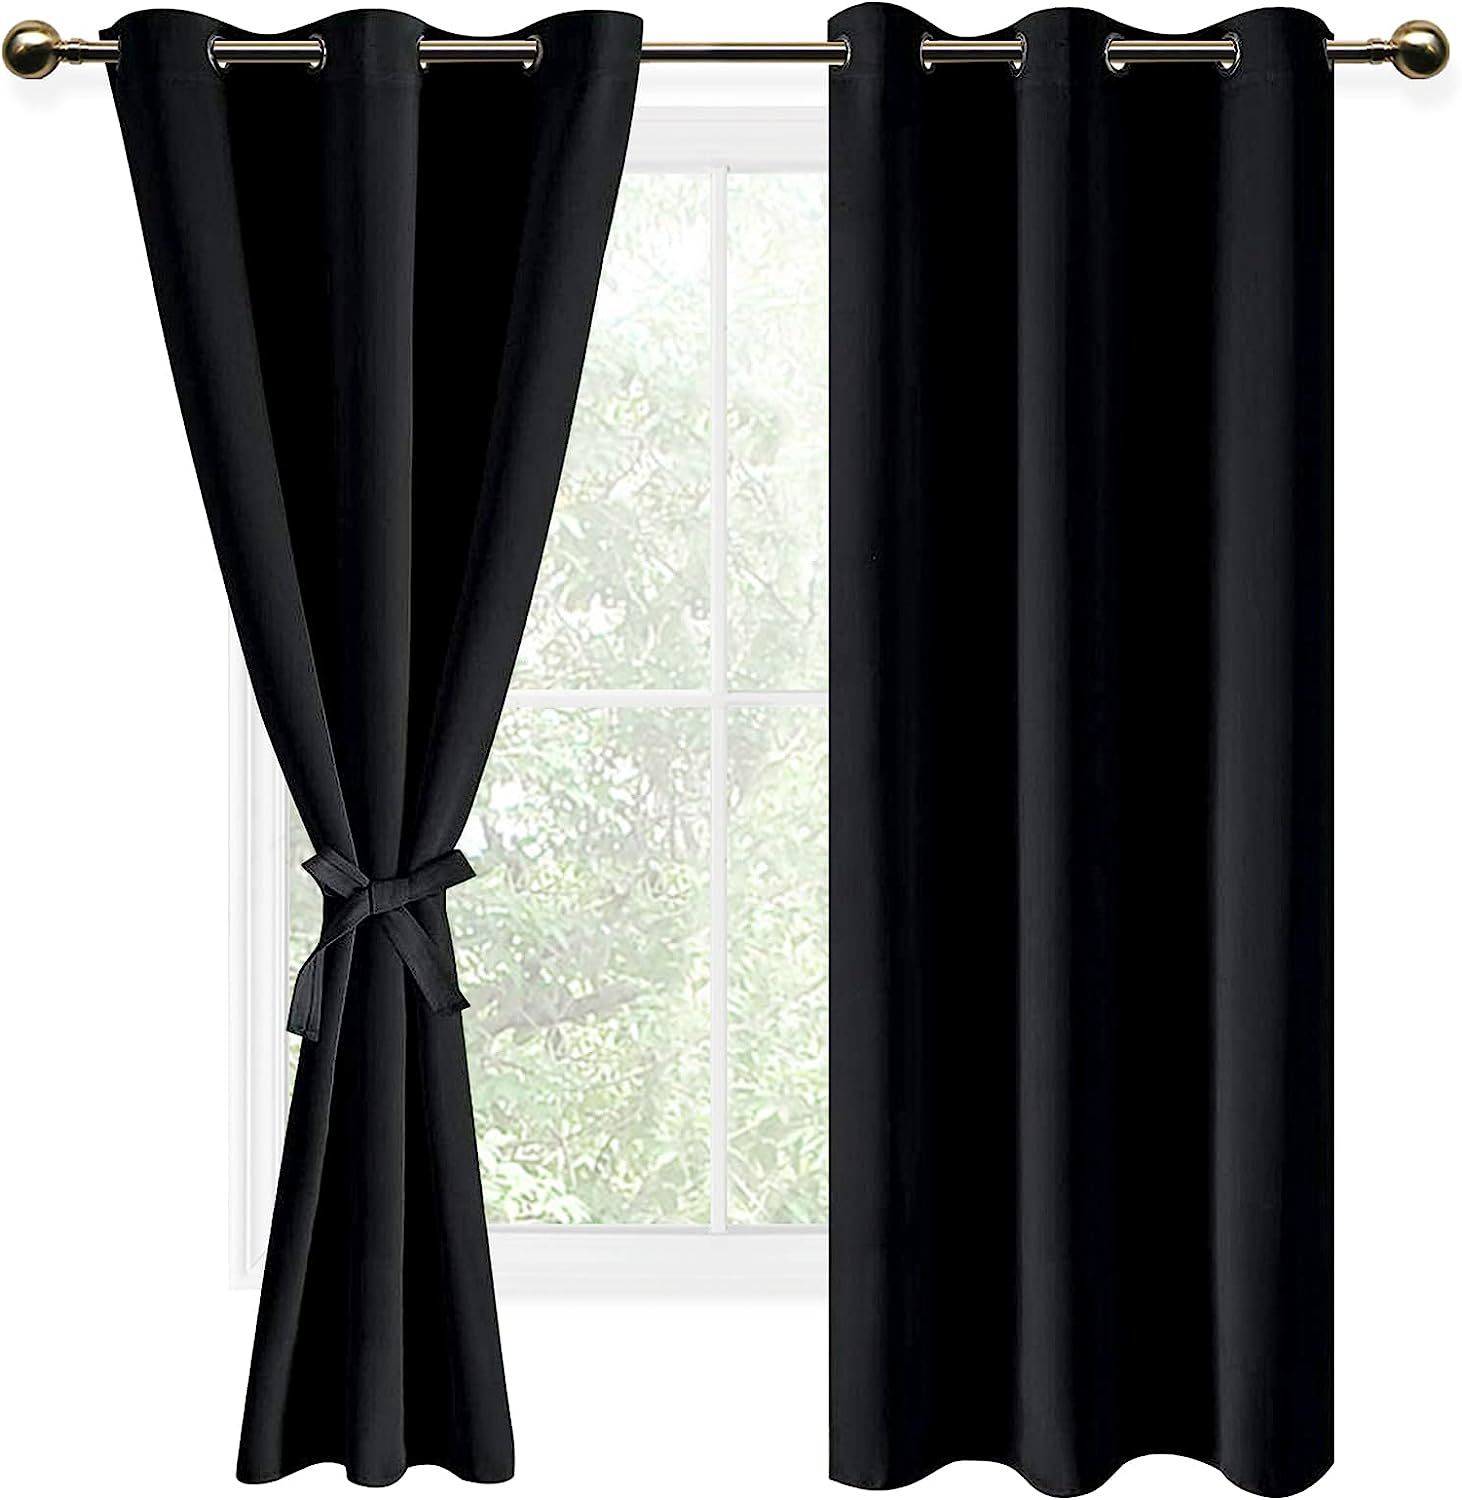 Dwcn Black Blackout Curtains For Bedroom Sewn With Tiebacks - Thermal Insulated - $31.98